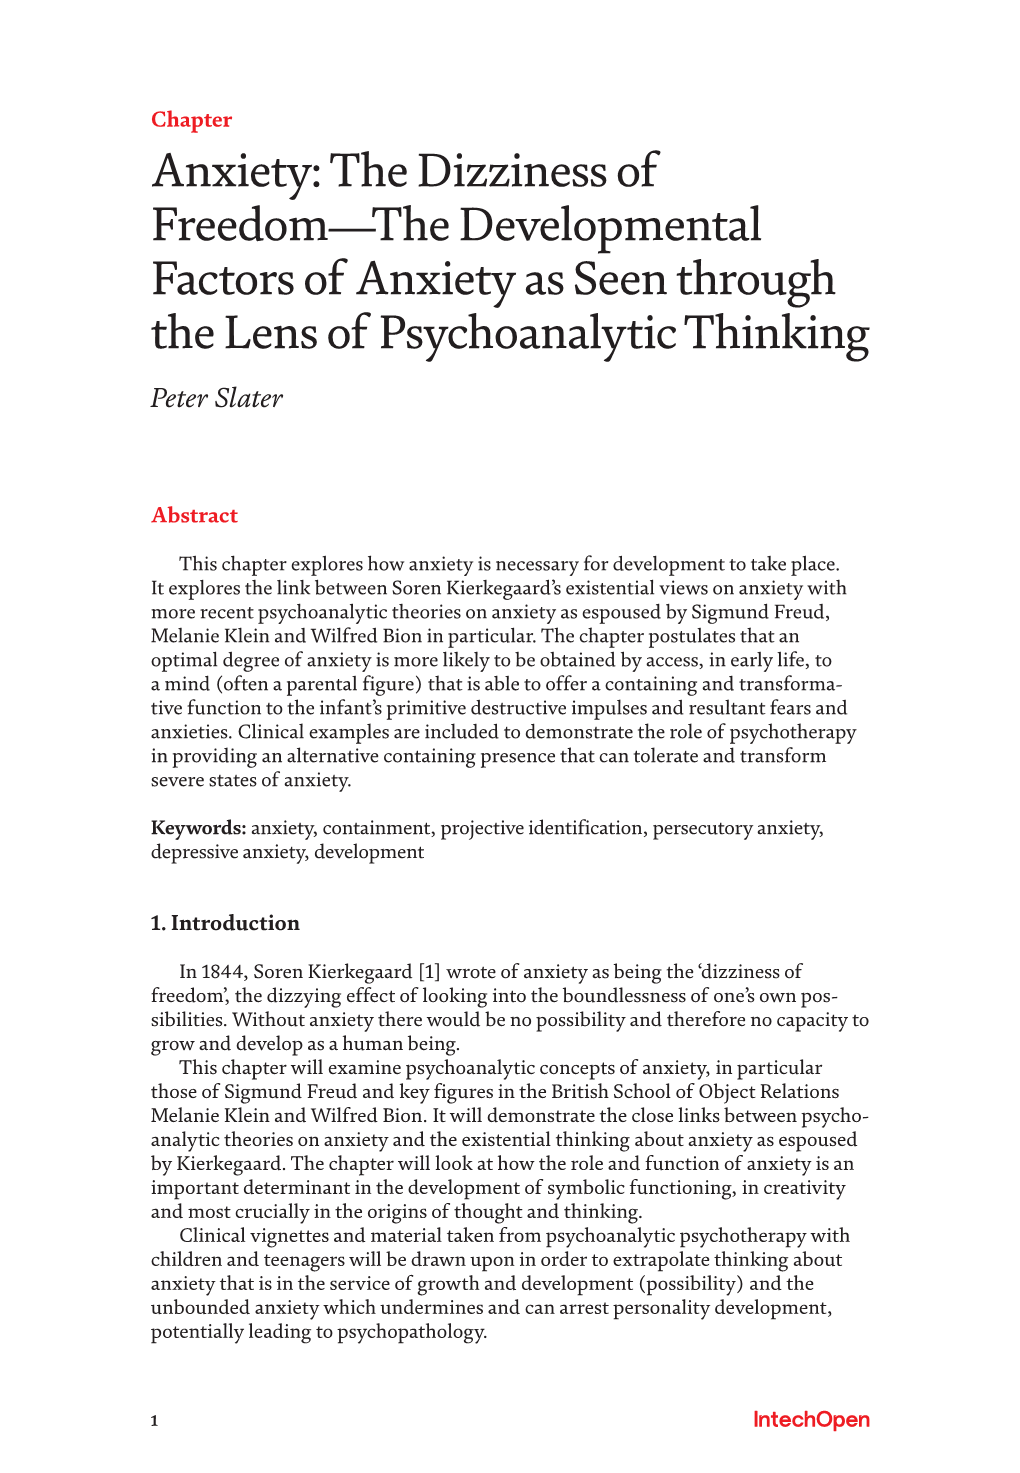 Anxiety: the Dizziness of Freedom—The Developmental Factors of Anxiety As Seen Through the Lens of Psychoanalytic Thinking Peter Slater